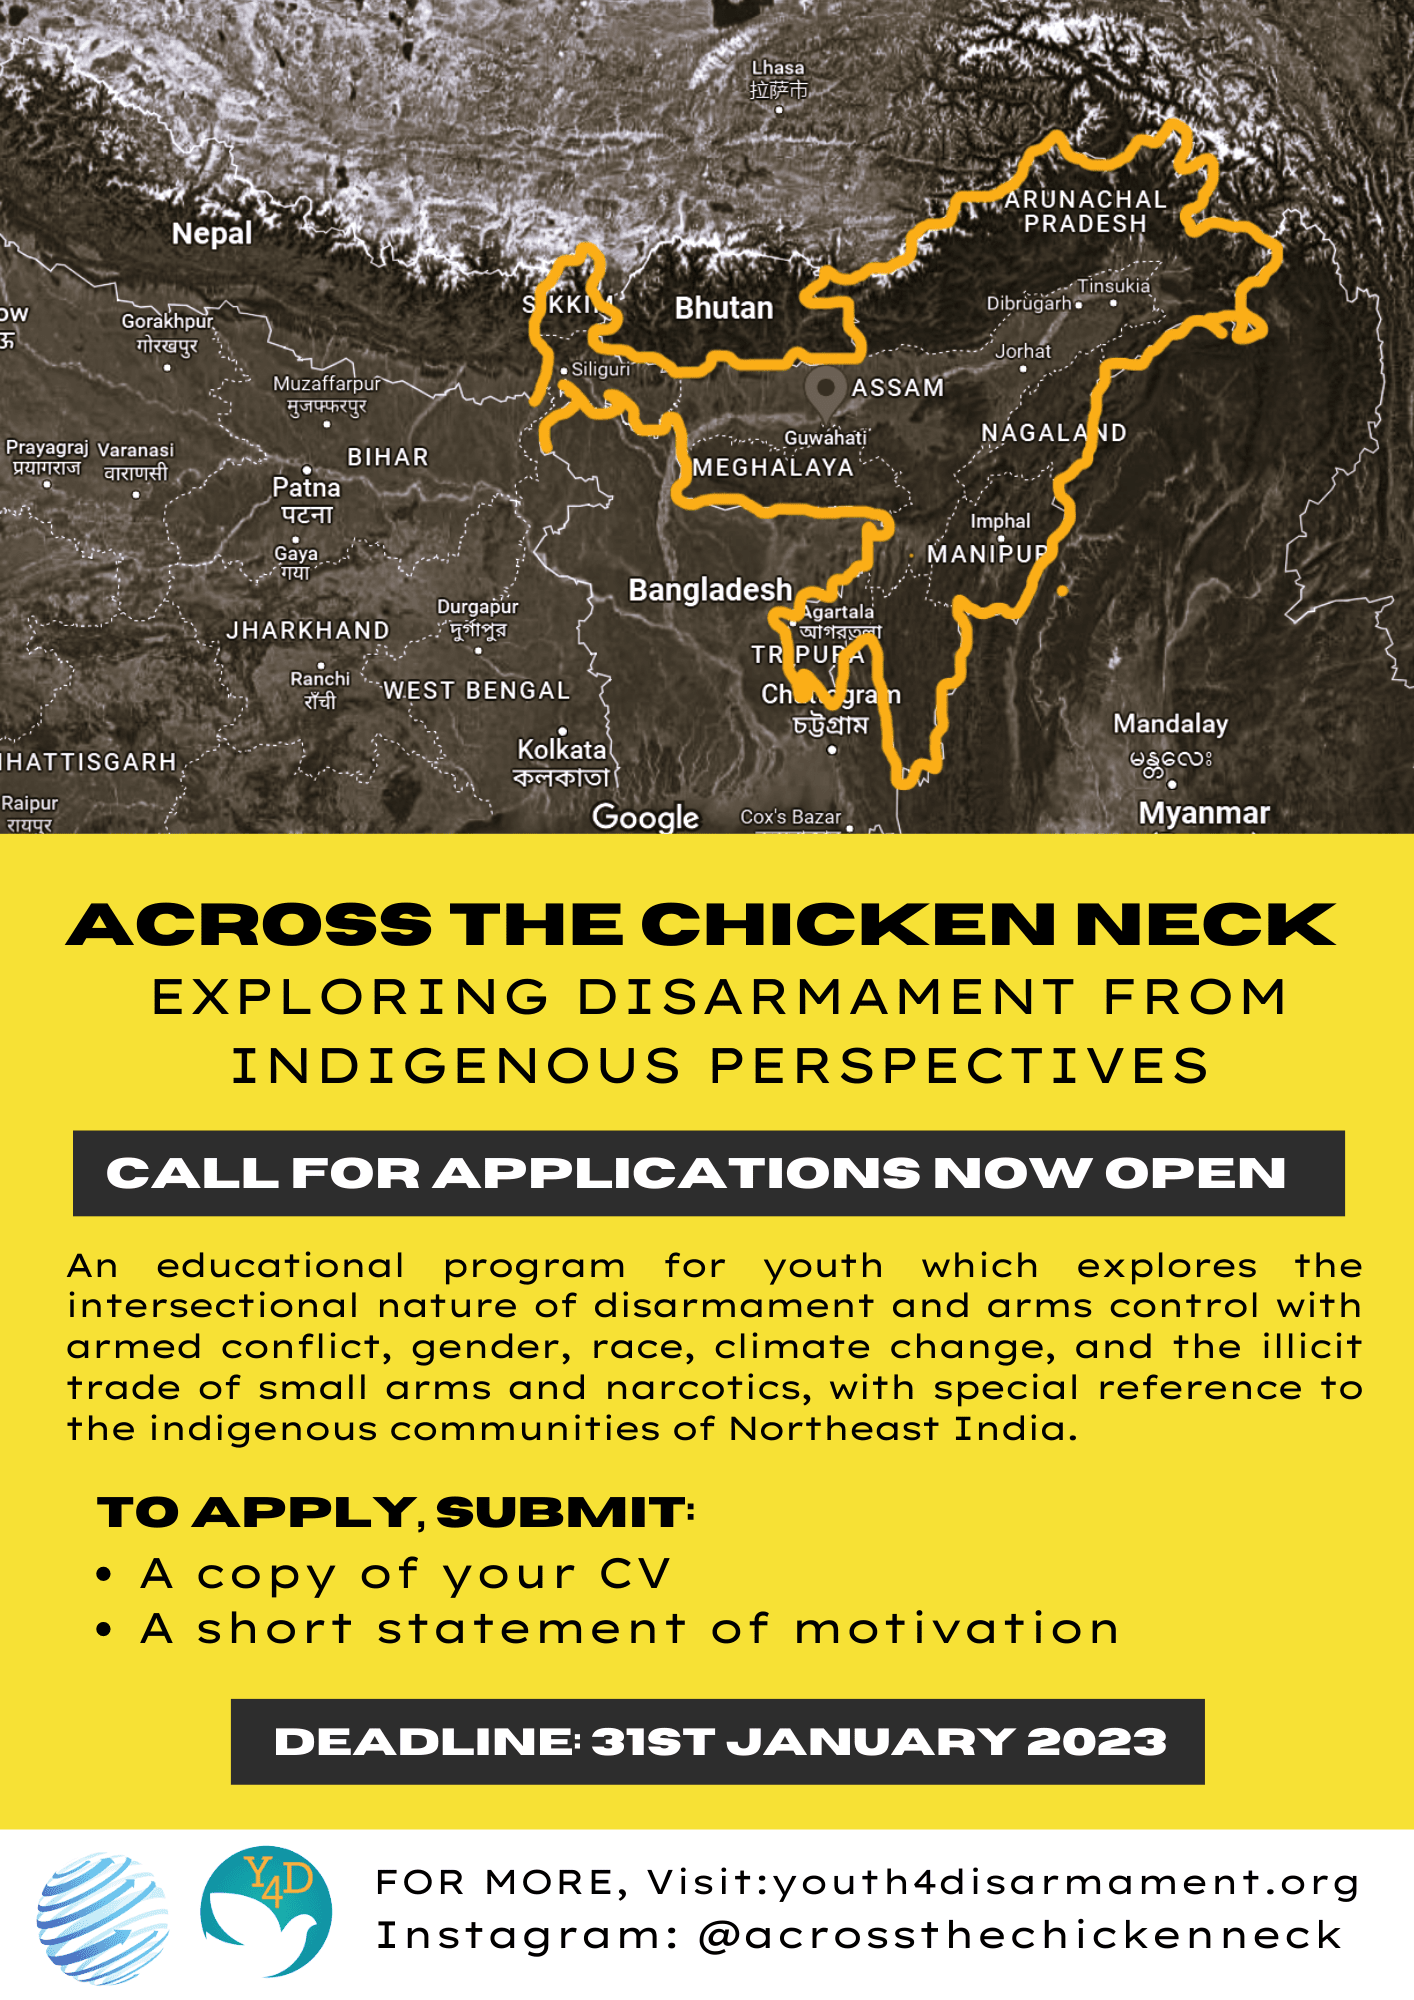 Flyer for Monalisa's project "Across the Chicken Neck".